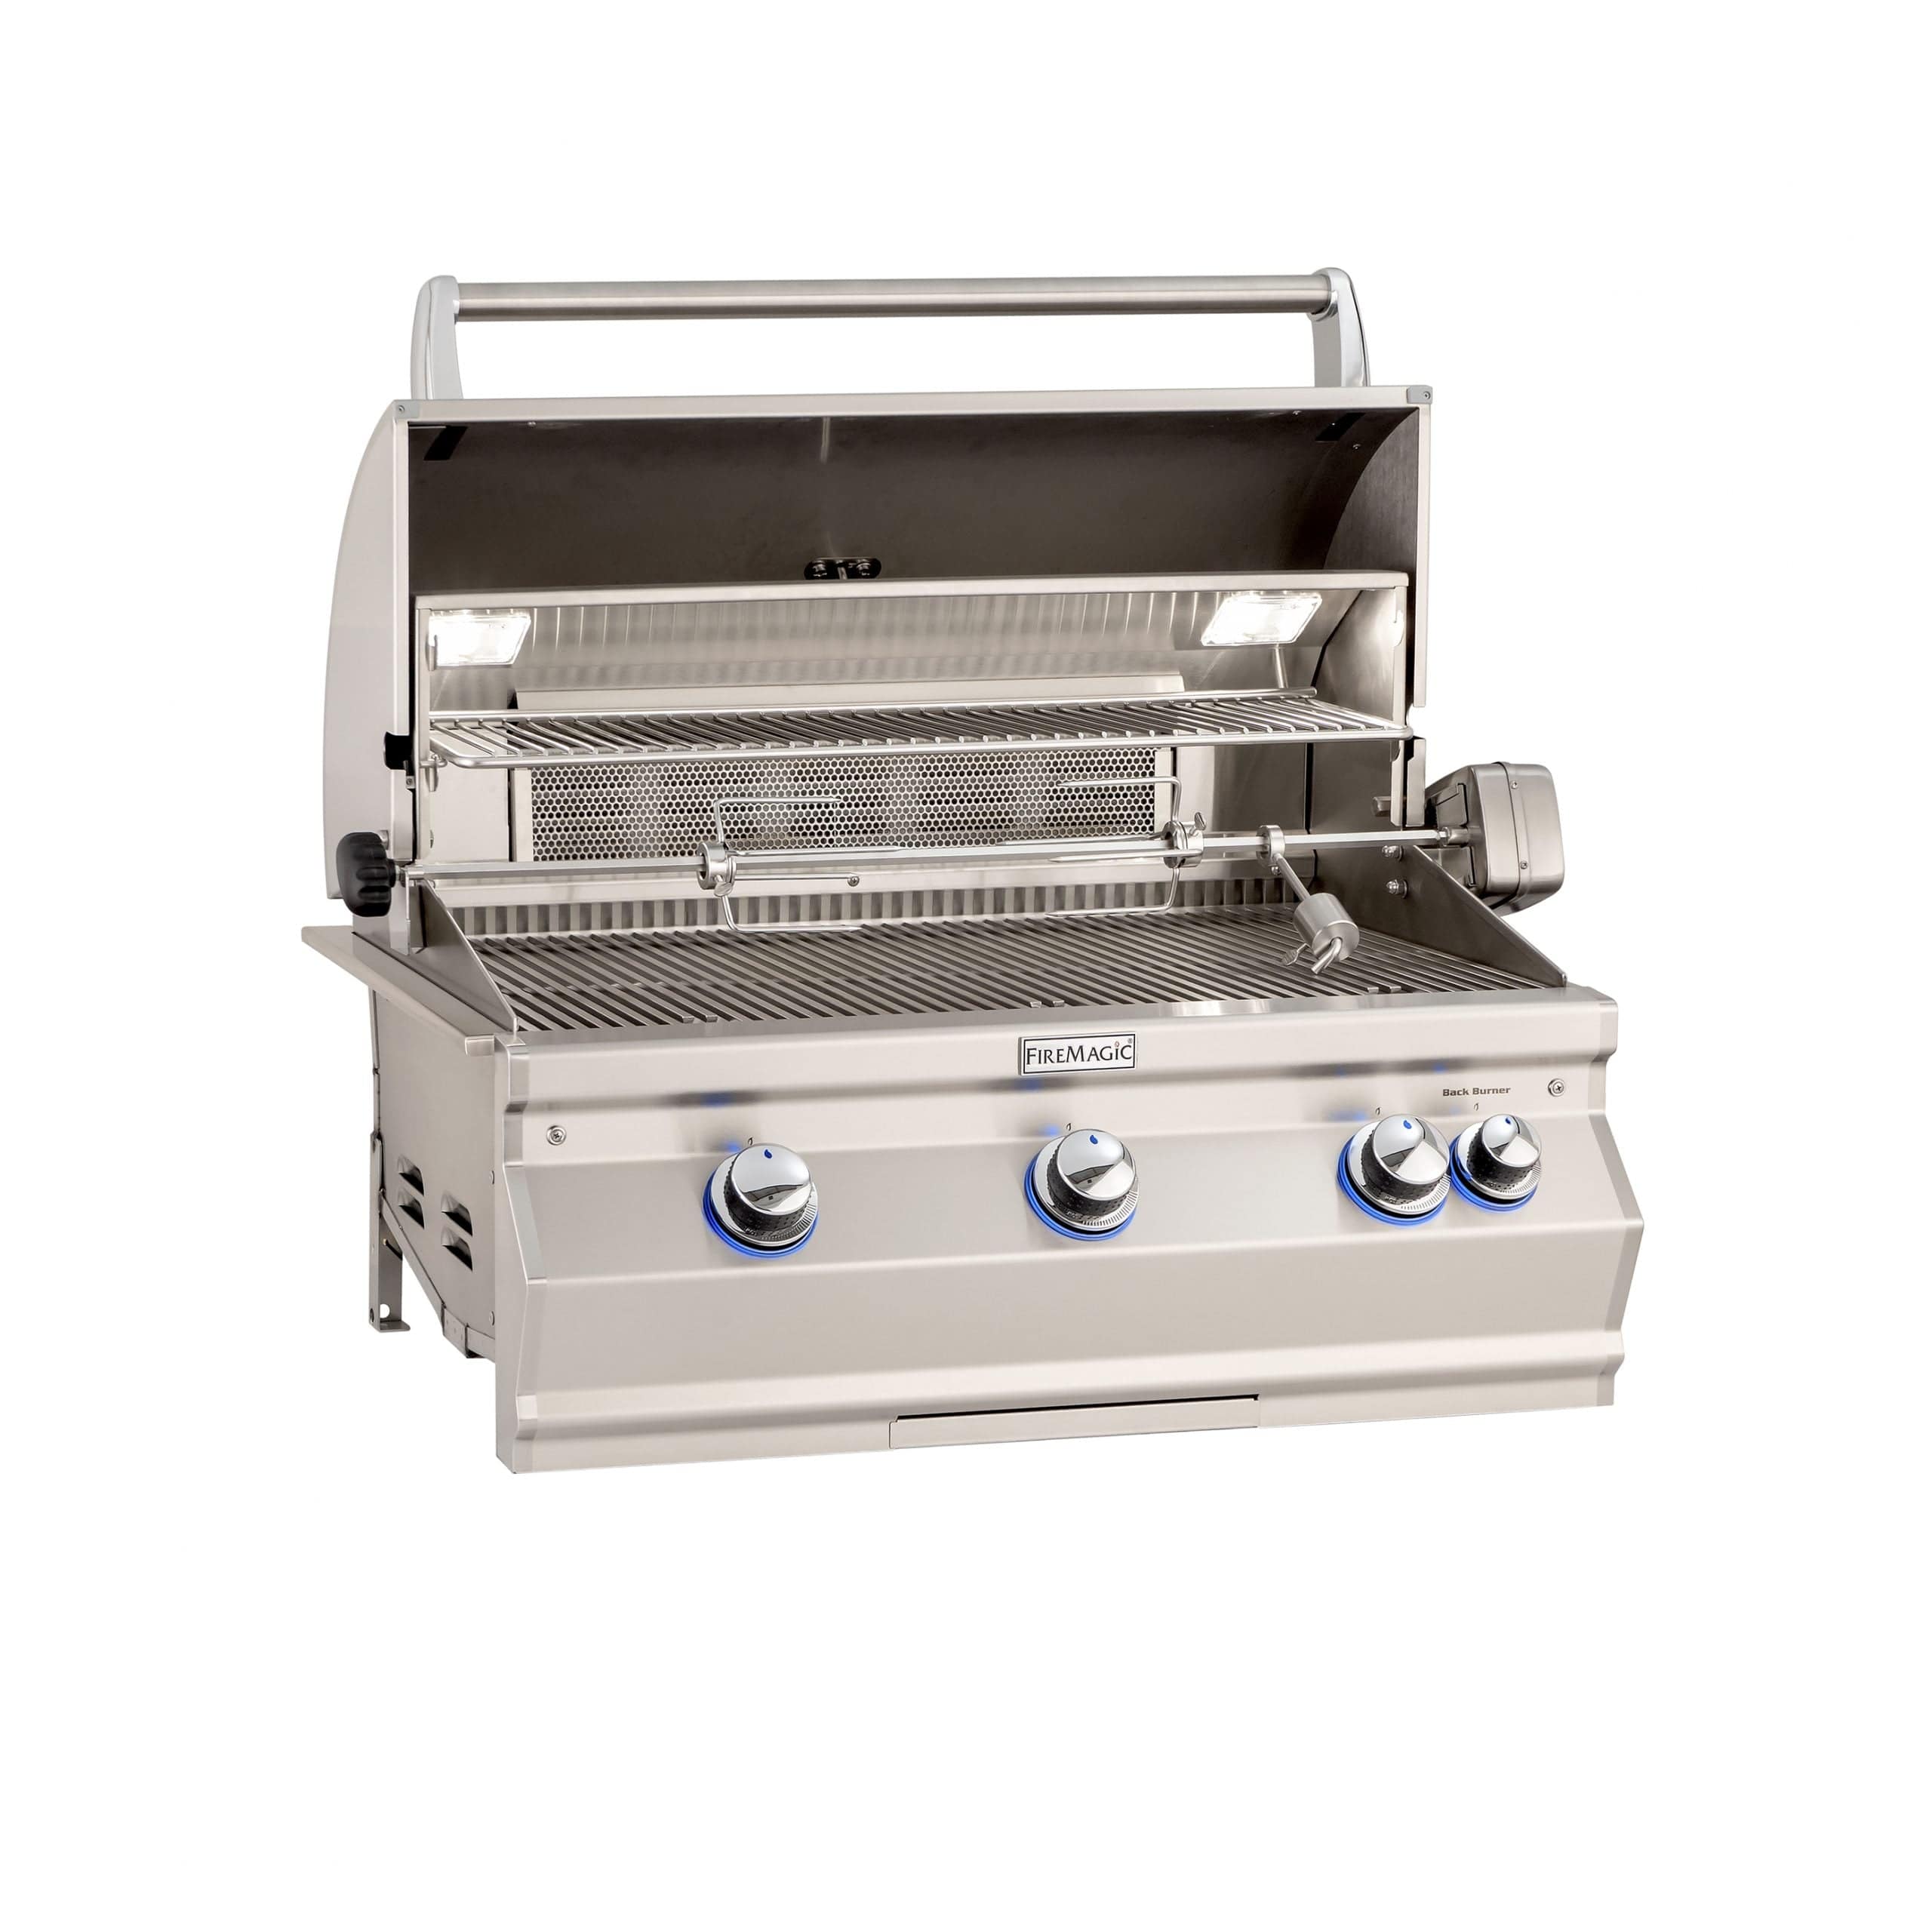 Fire Magic Built-In Grill Fire Magic - Aurora A540i Built-In Grill With Analog Thermometer With Rotisserie Back Burner - Natural Gas / Liquid Propane 1